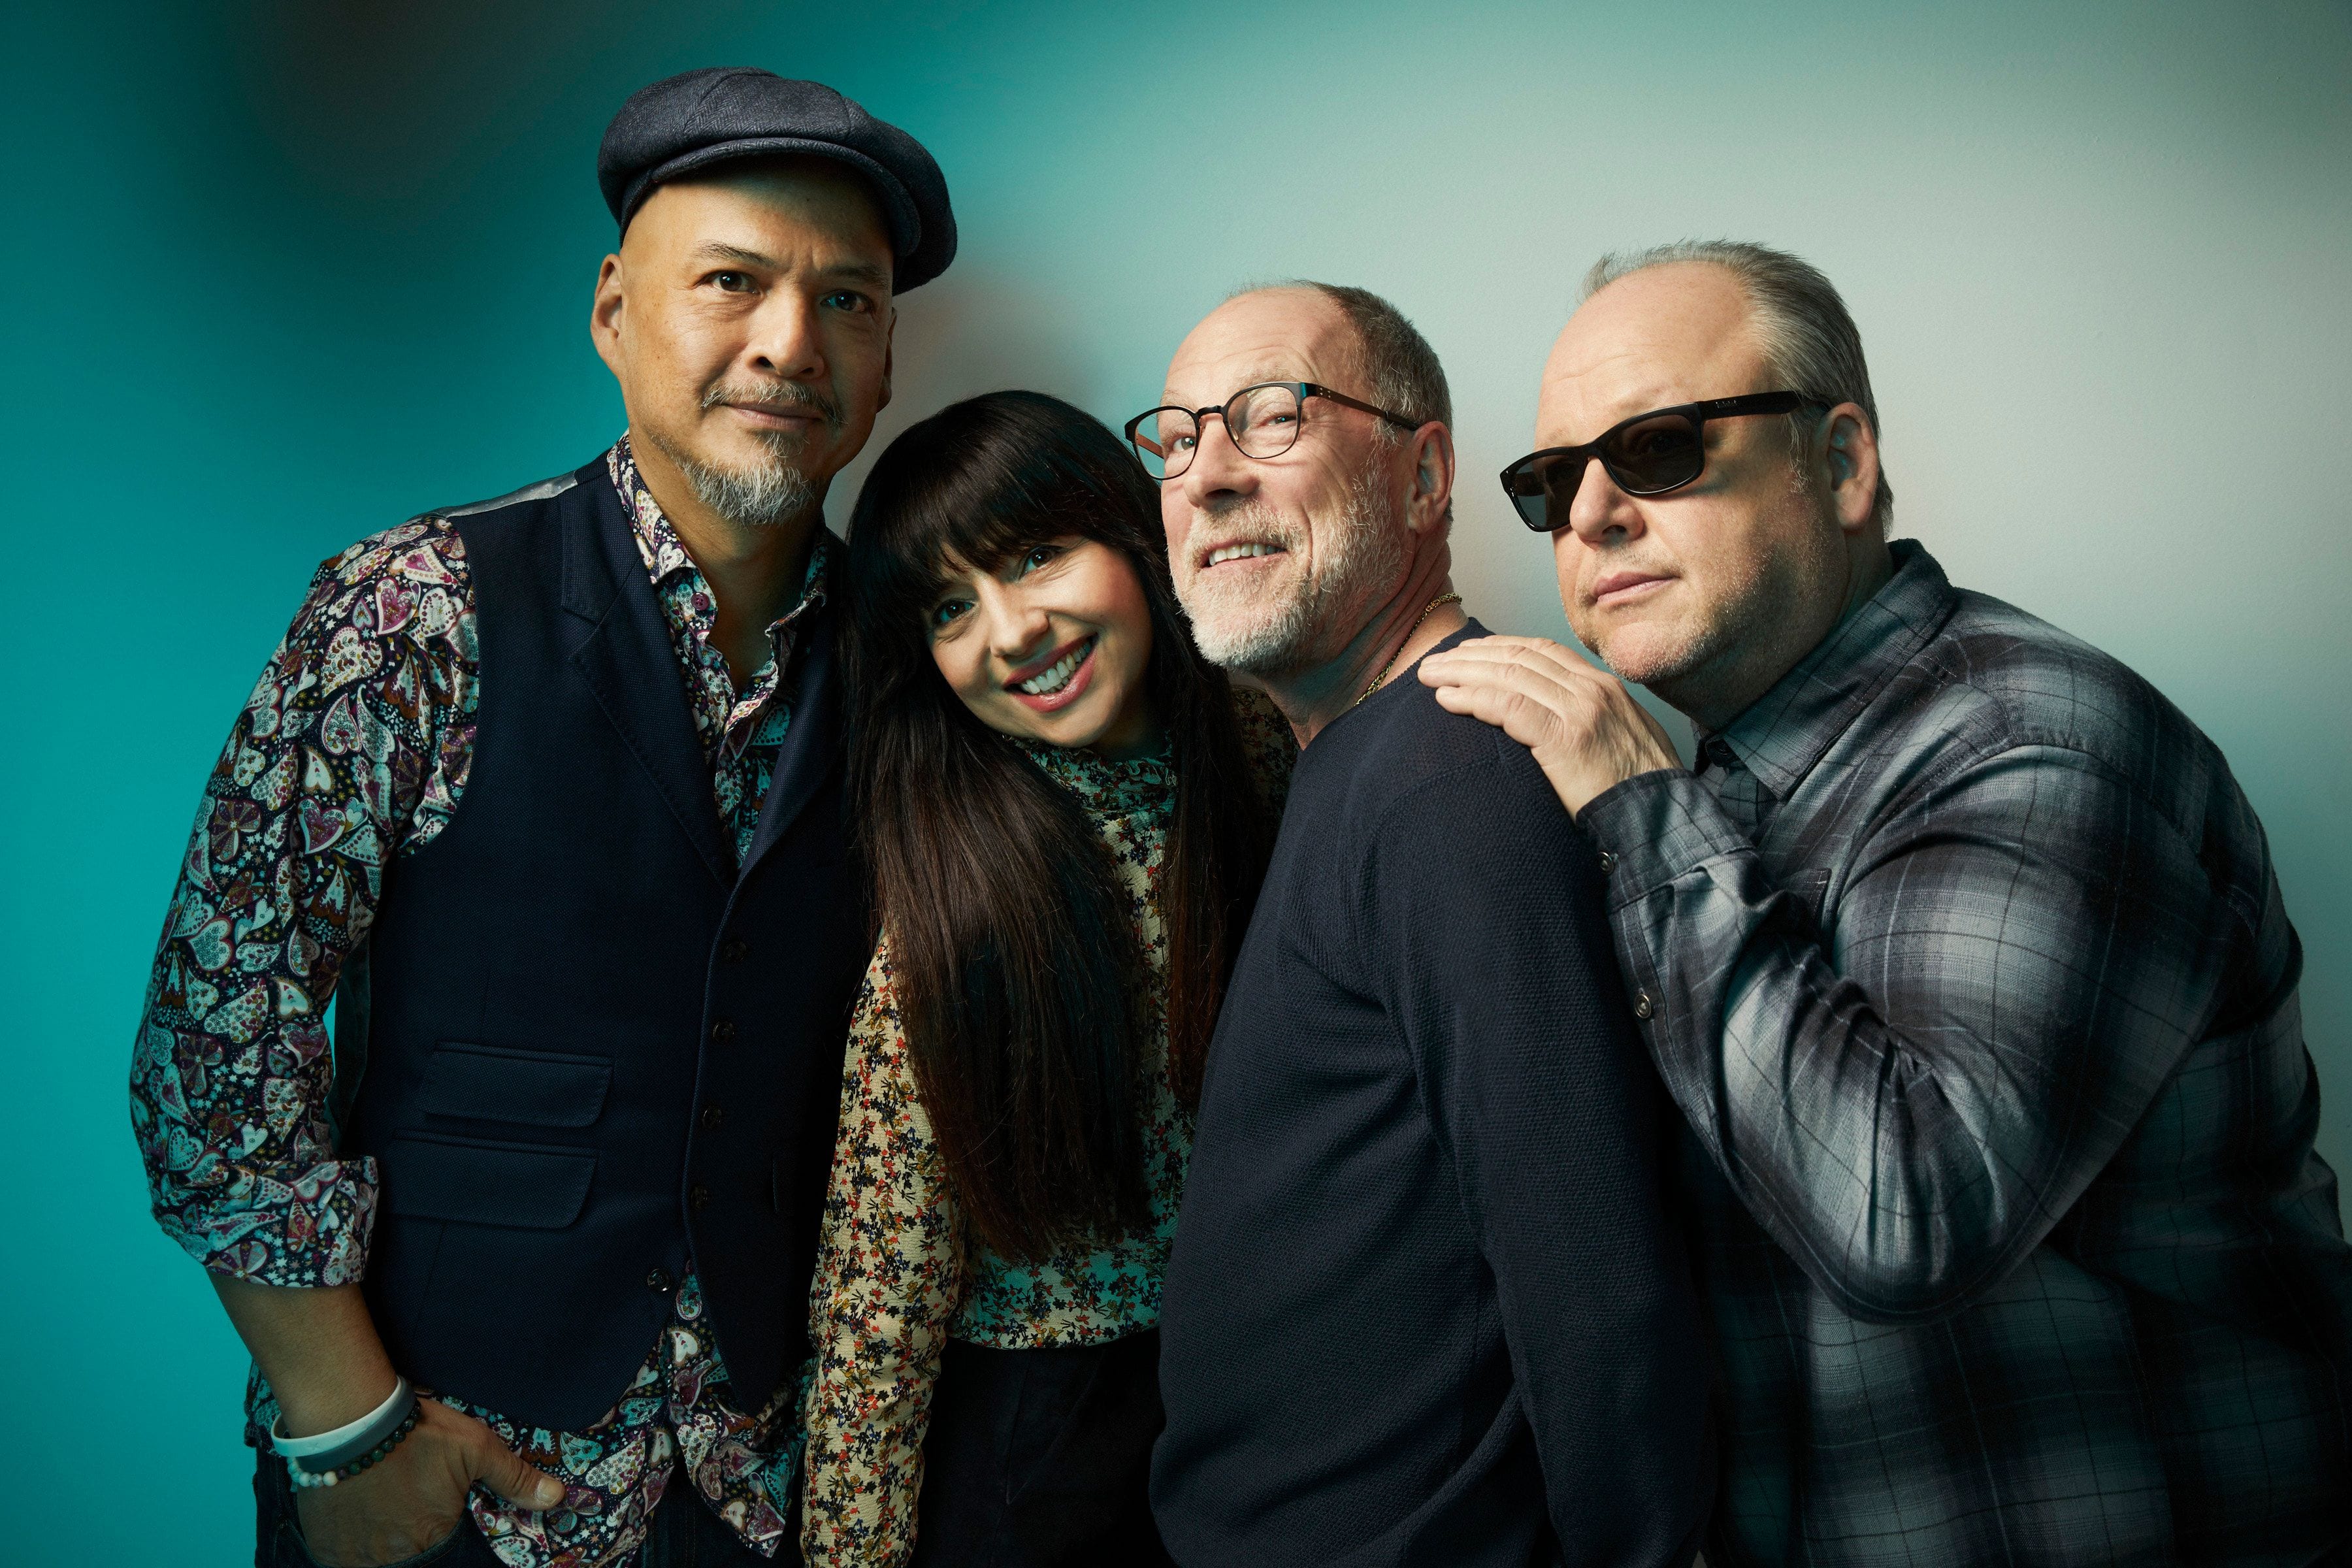 ‘Beneath the Eyrie’ Is the Pixies’ Strongest Release Since Their Reemergence